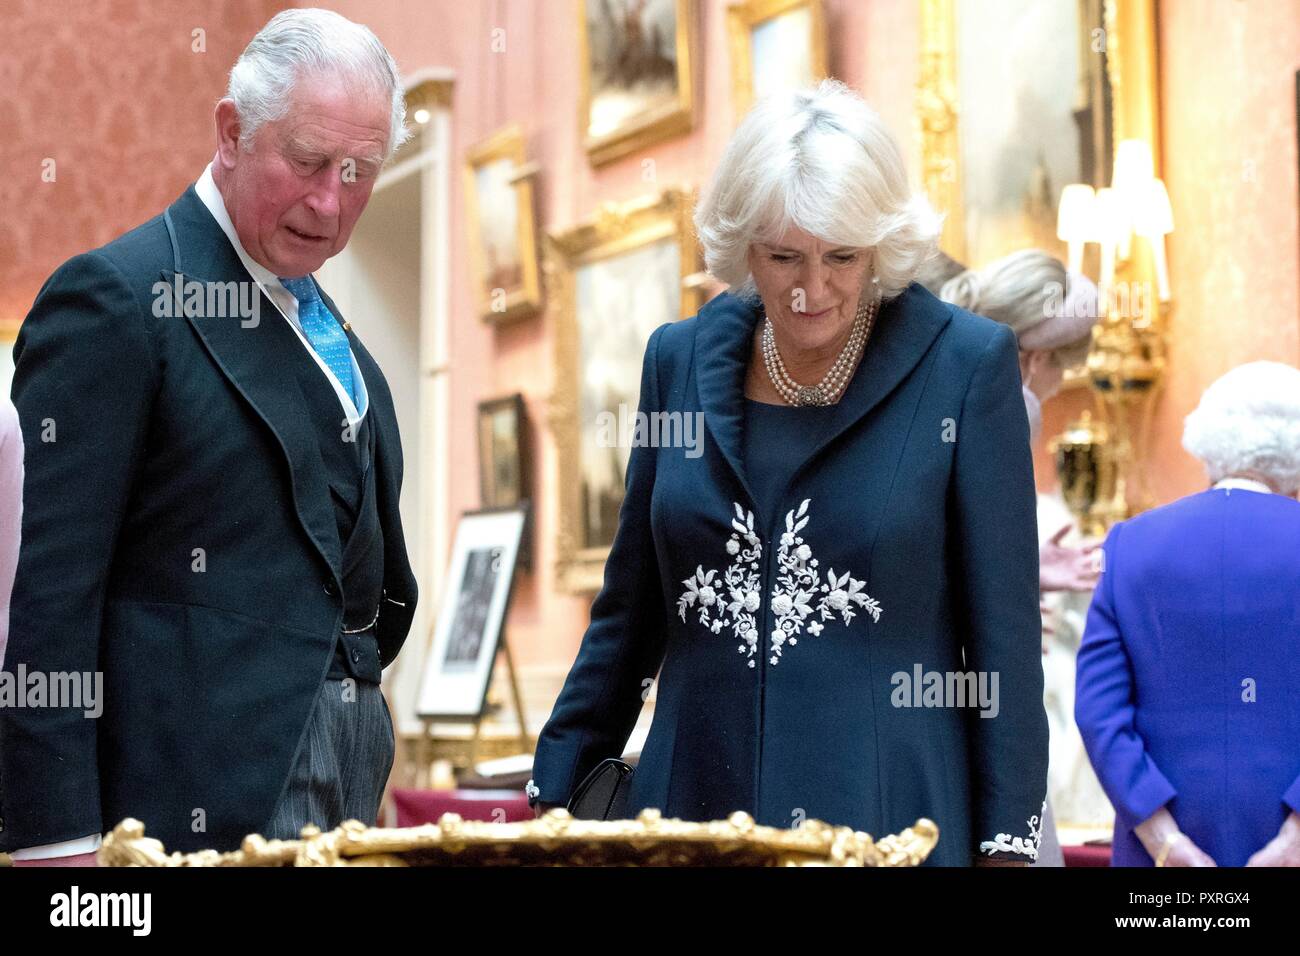 london-uk-23rd-oct-2018-prince-charles-and-camilla-duchess-of-cornwall-at-buckingham-palace-in-londen-on-october-23-2018-for-the-guided-tour-royal-collection-on-the-1st-of-a-2-days-statevisit-to-the-united-kingdom-credit-dpa-picture-alliancealamy-live-news-PXRGX4.jpg